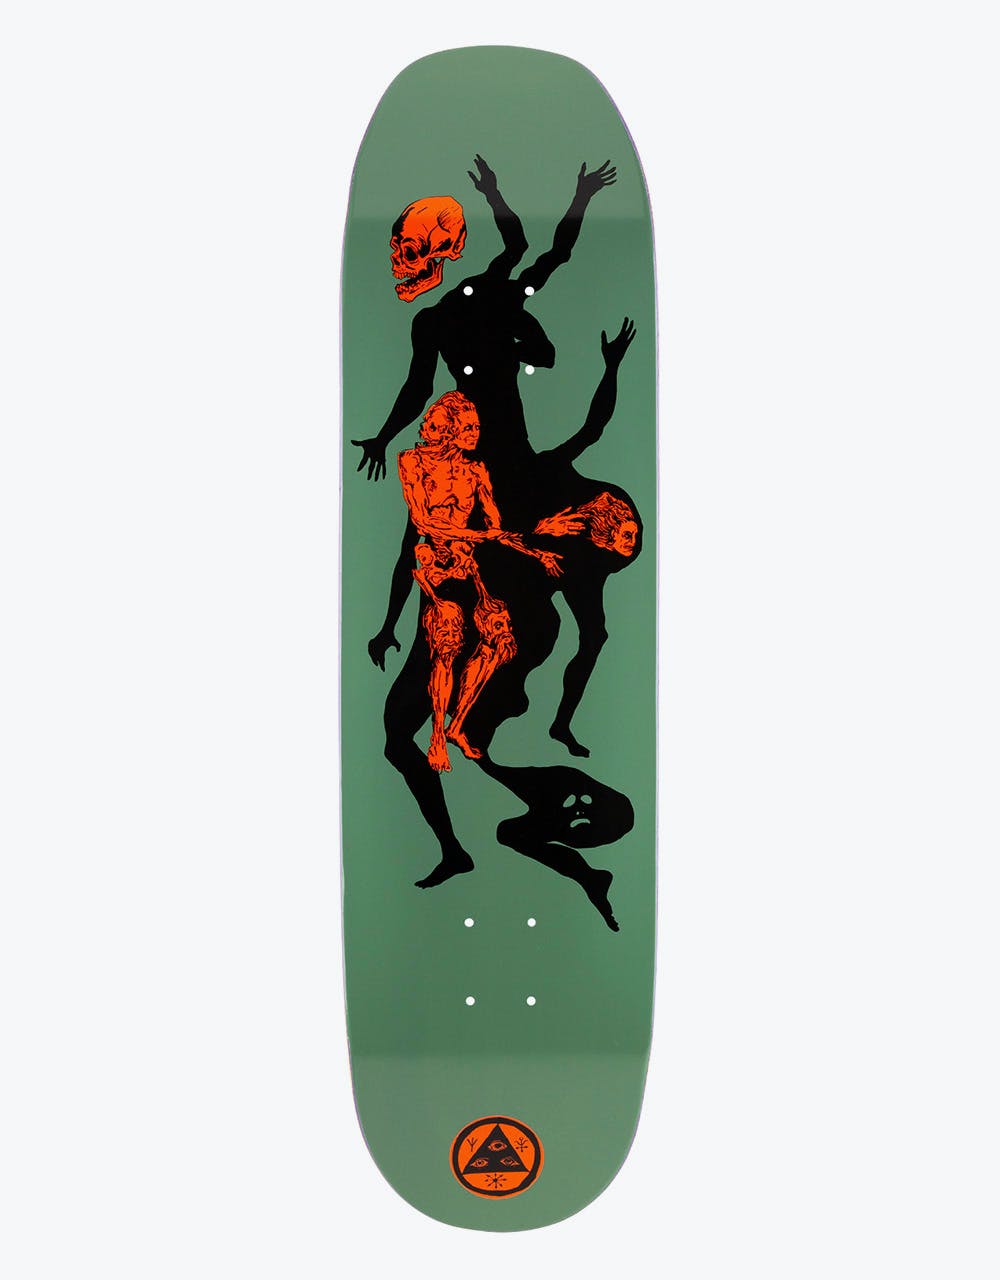 Welcome The Magician on Moontrimmer 2.0 Skateboard Deck - 8.5"